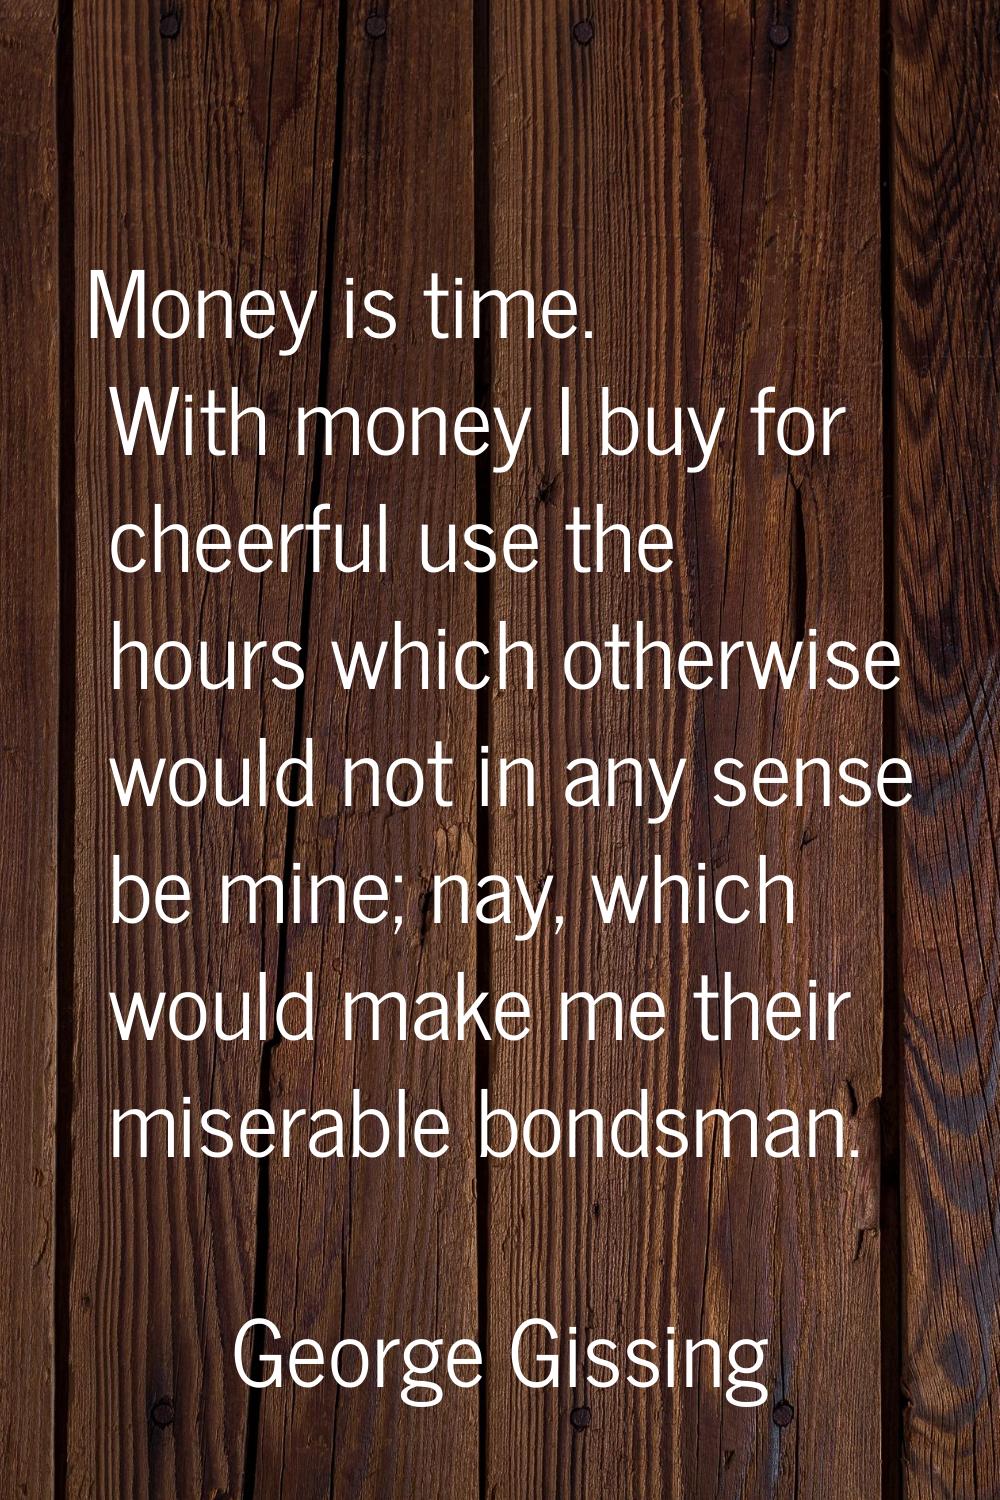 Money is time. With money I buy for cheerful use the hours which otherwise would not in any sense b